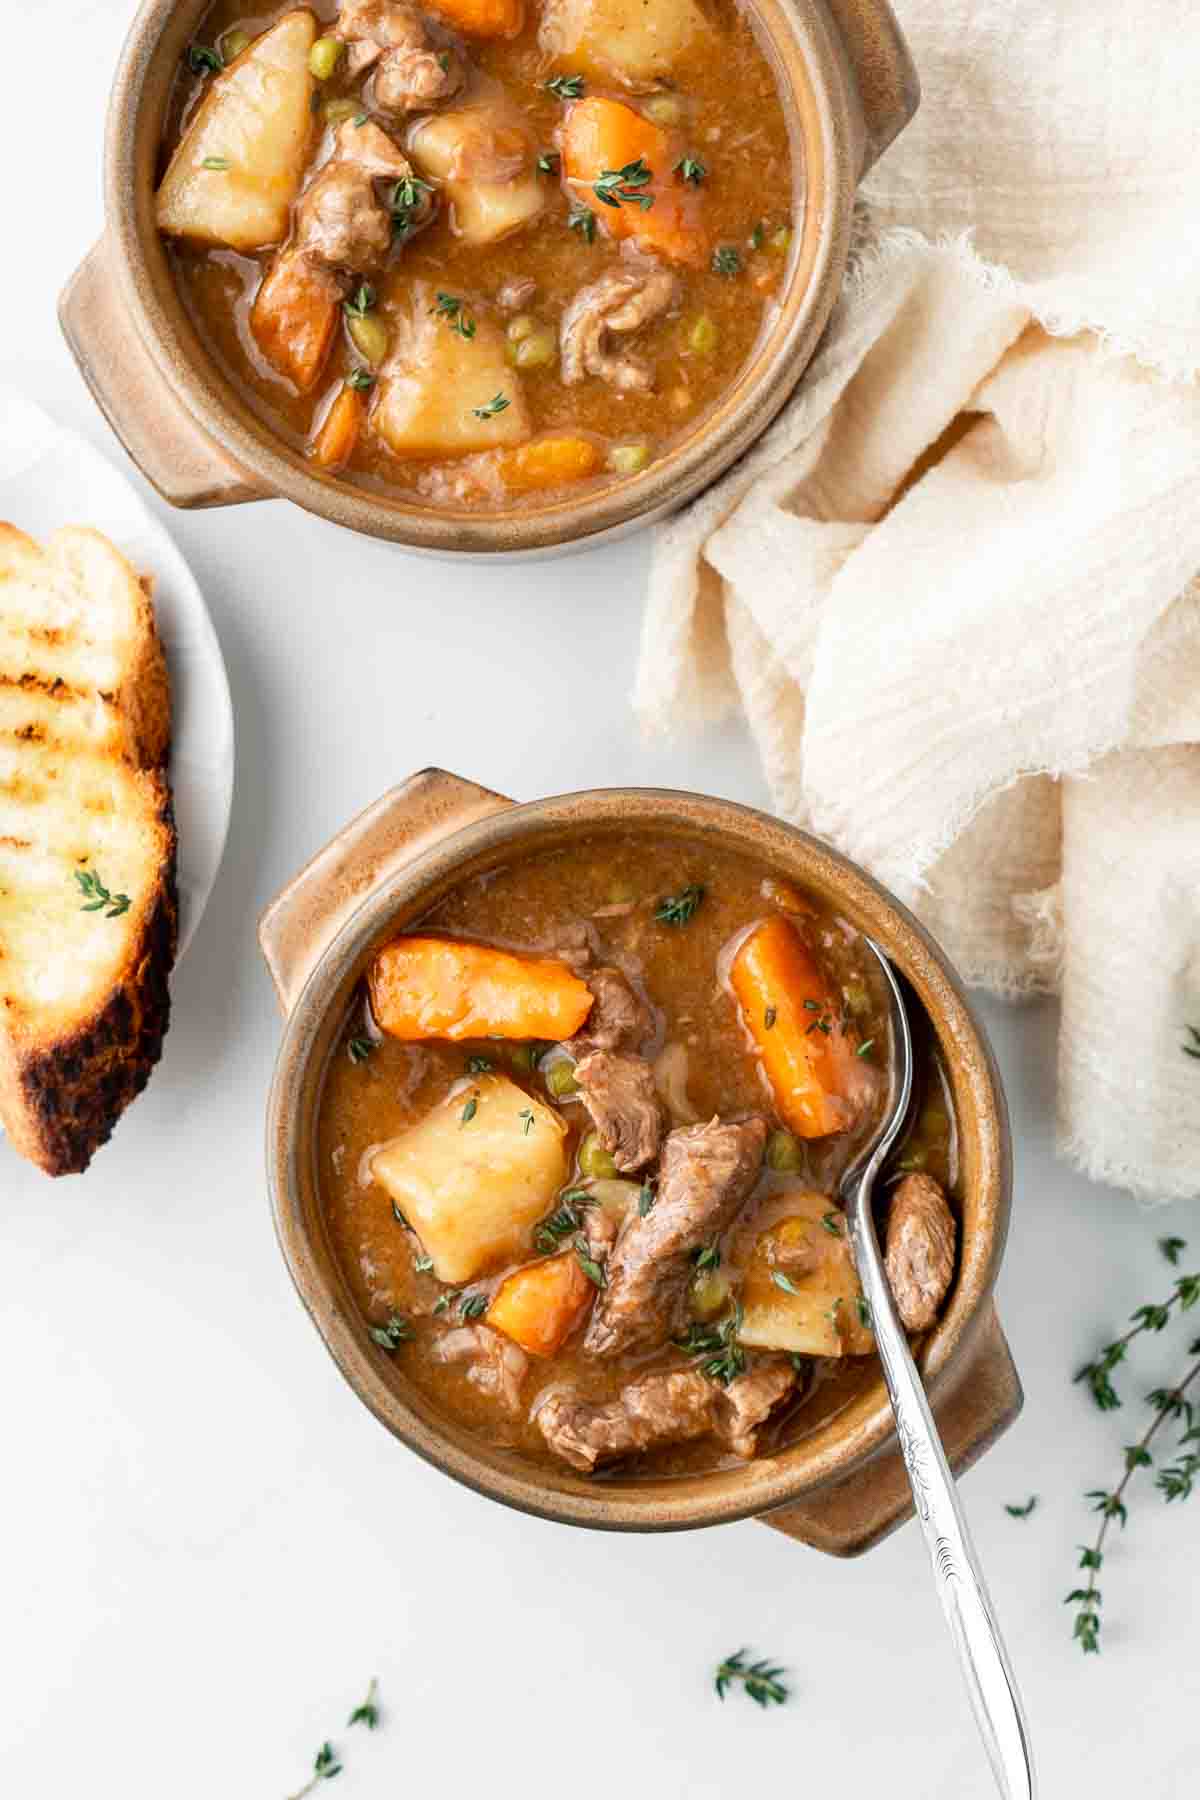 Close up of beef stew with potatoes and carrots with a side of toasted bread.